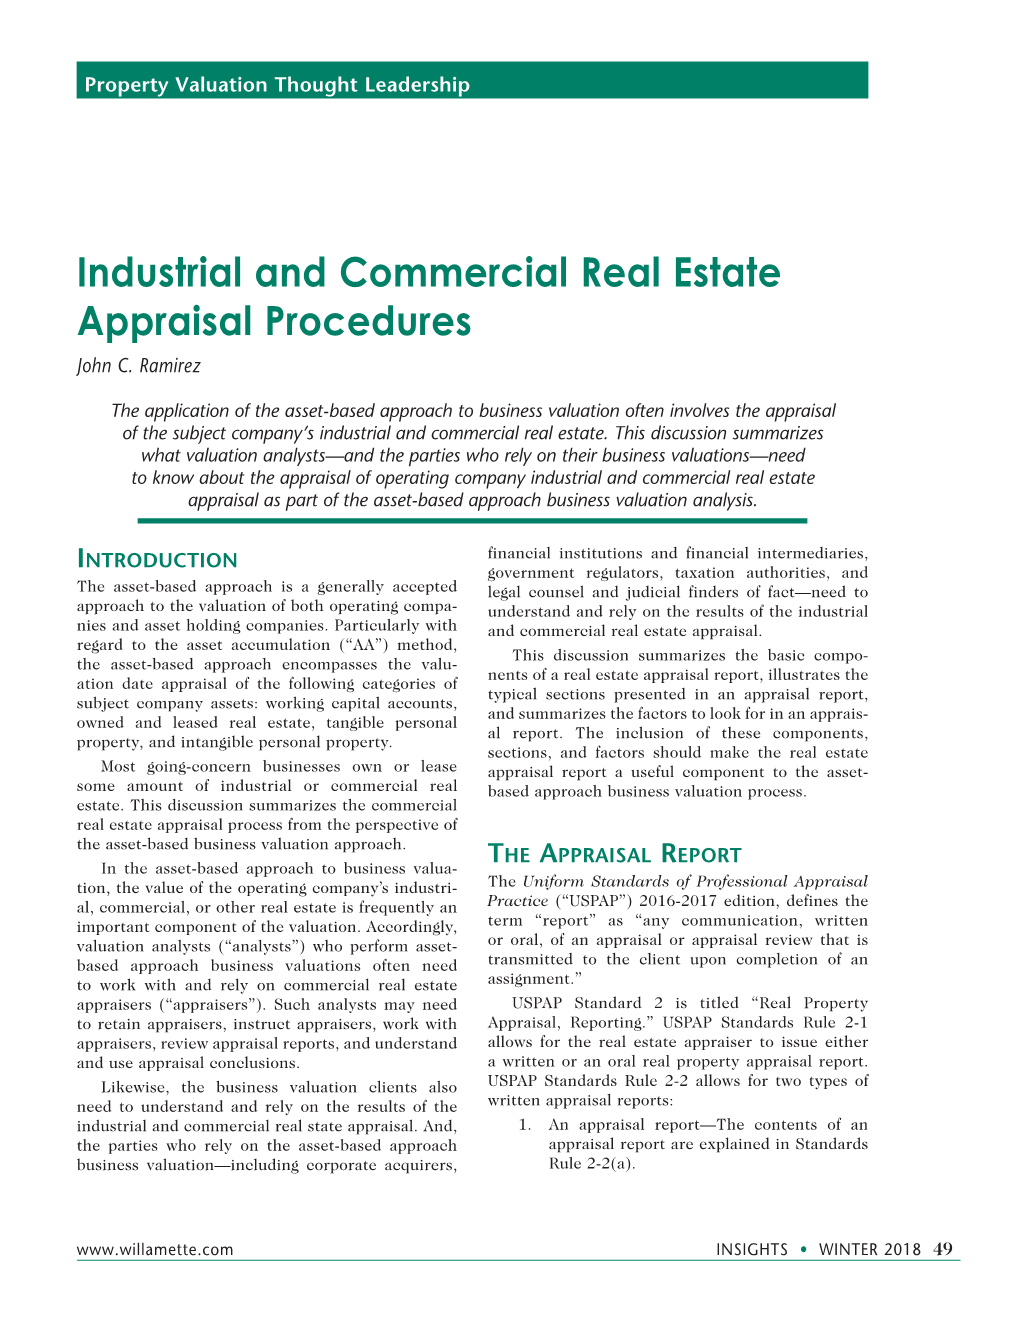 Industrial and Commercial Real Estate Appraisal Procedures John C